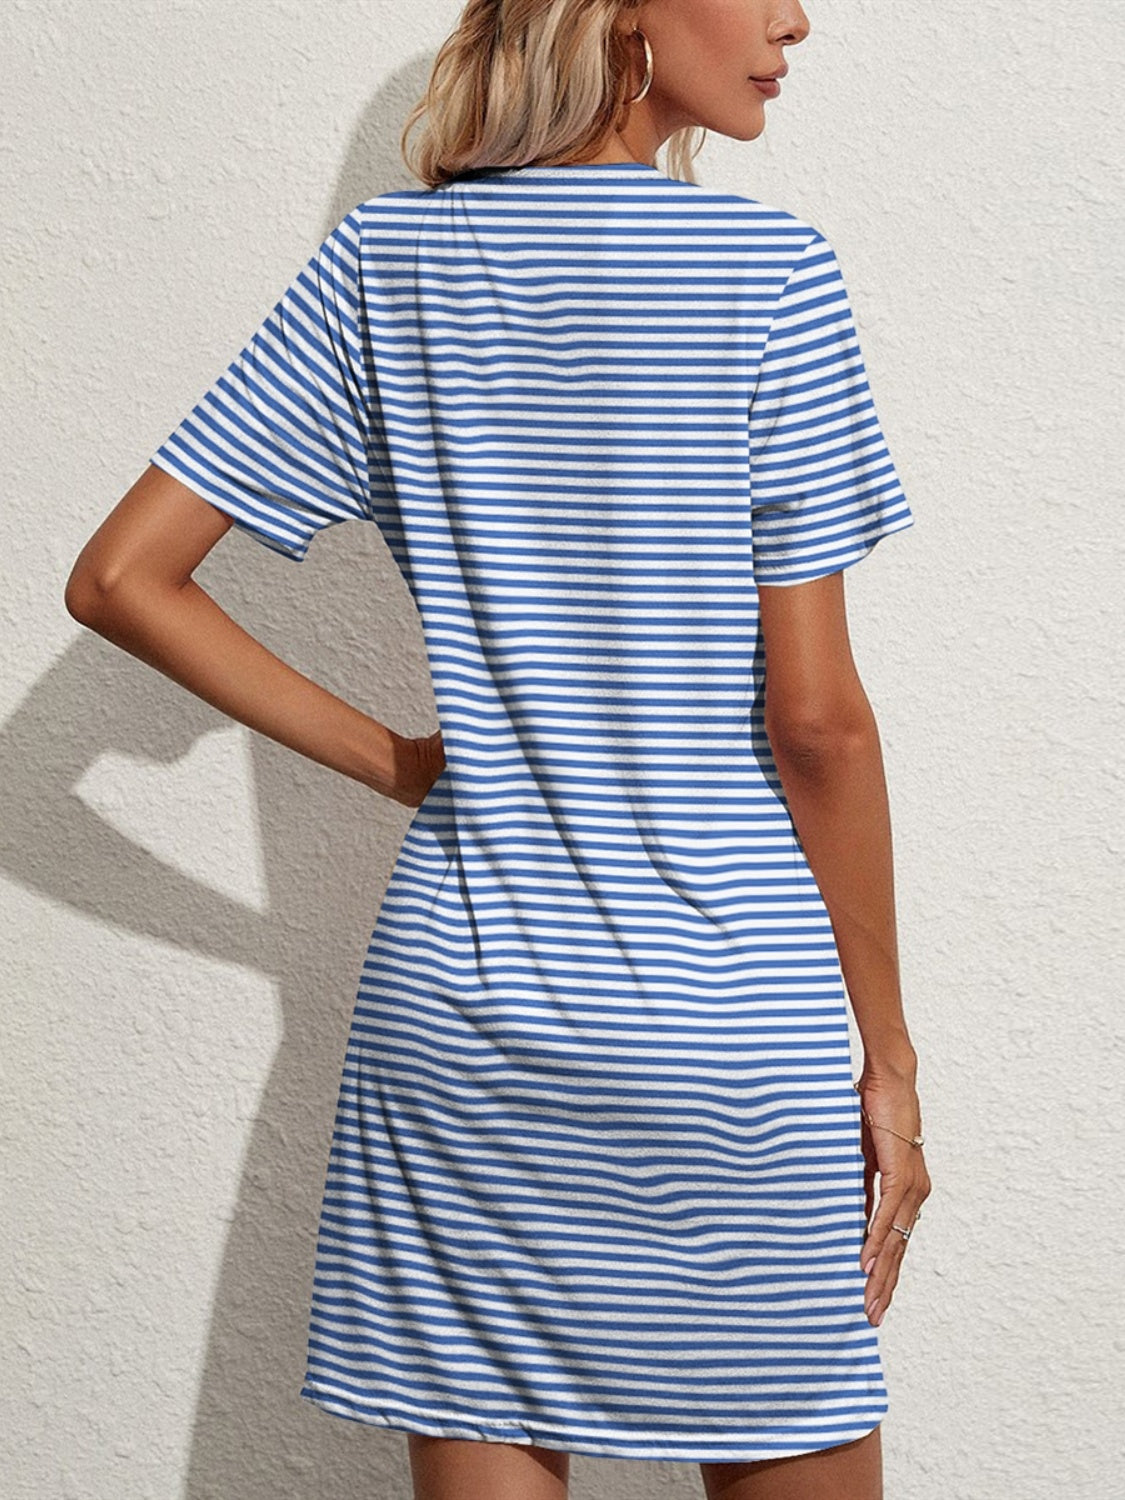 Blue Zone Planet |  Pocketed Striped Round Neck Short Sleeve Dress BLUE ZONE PLANET